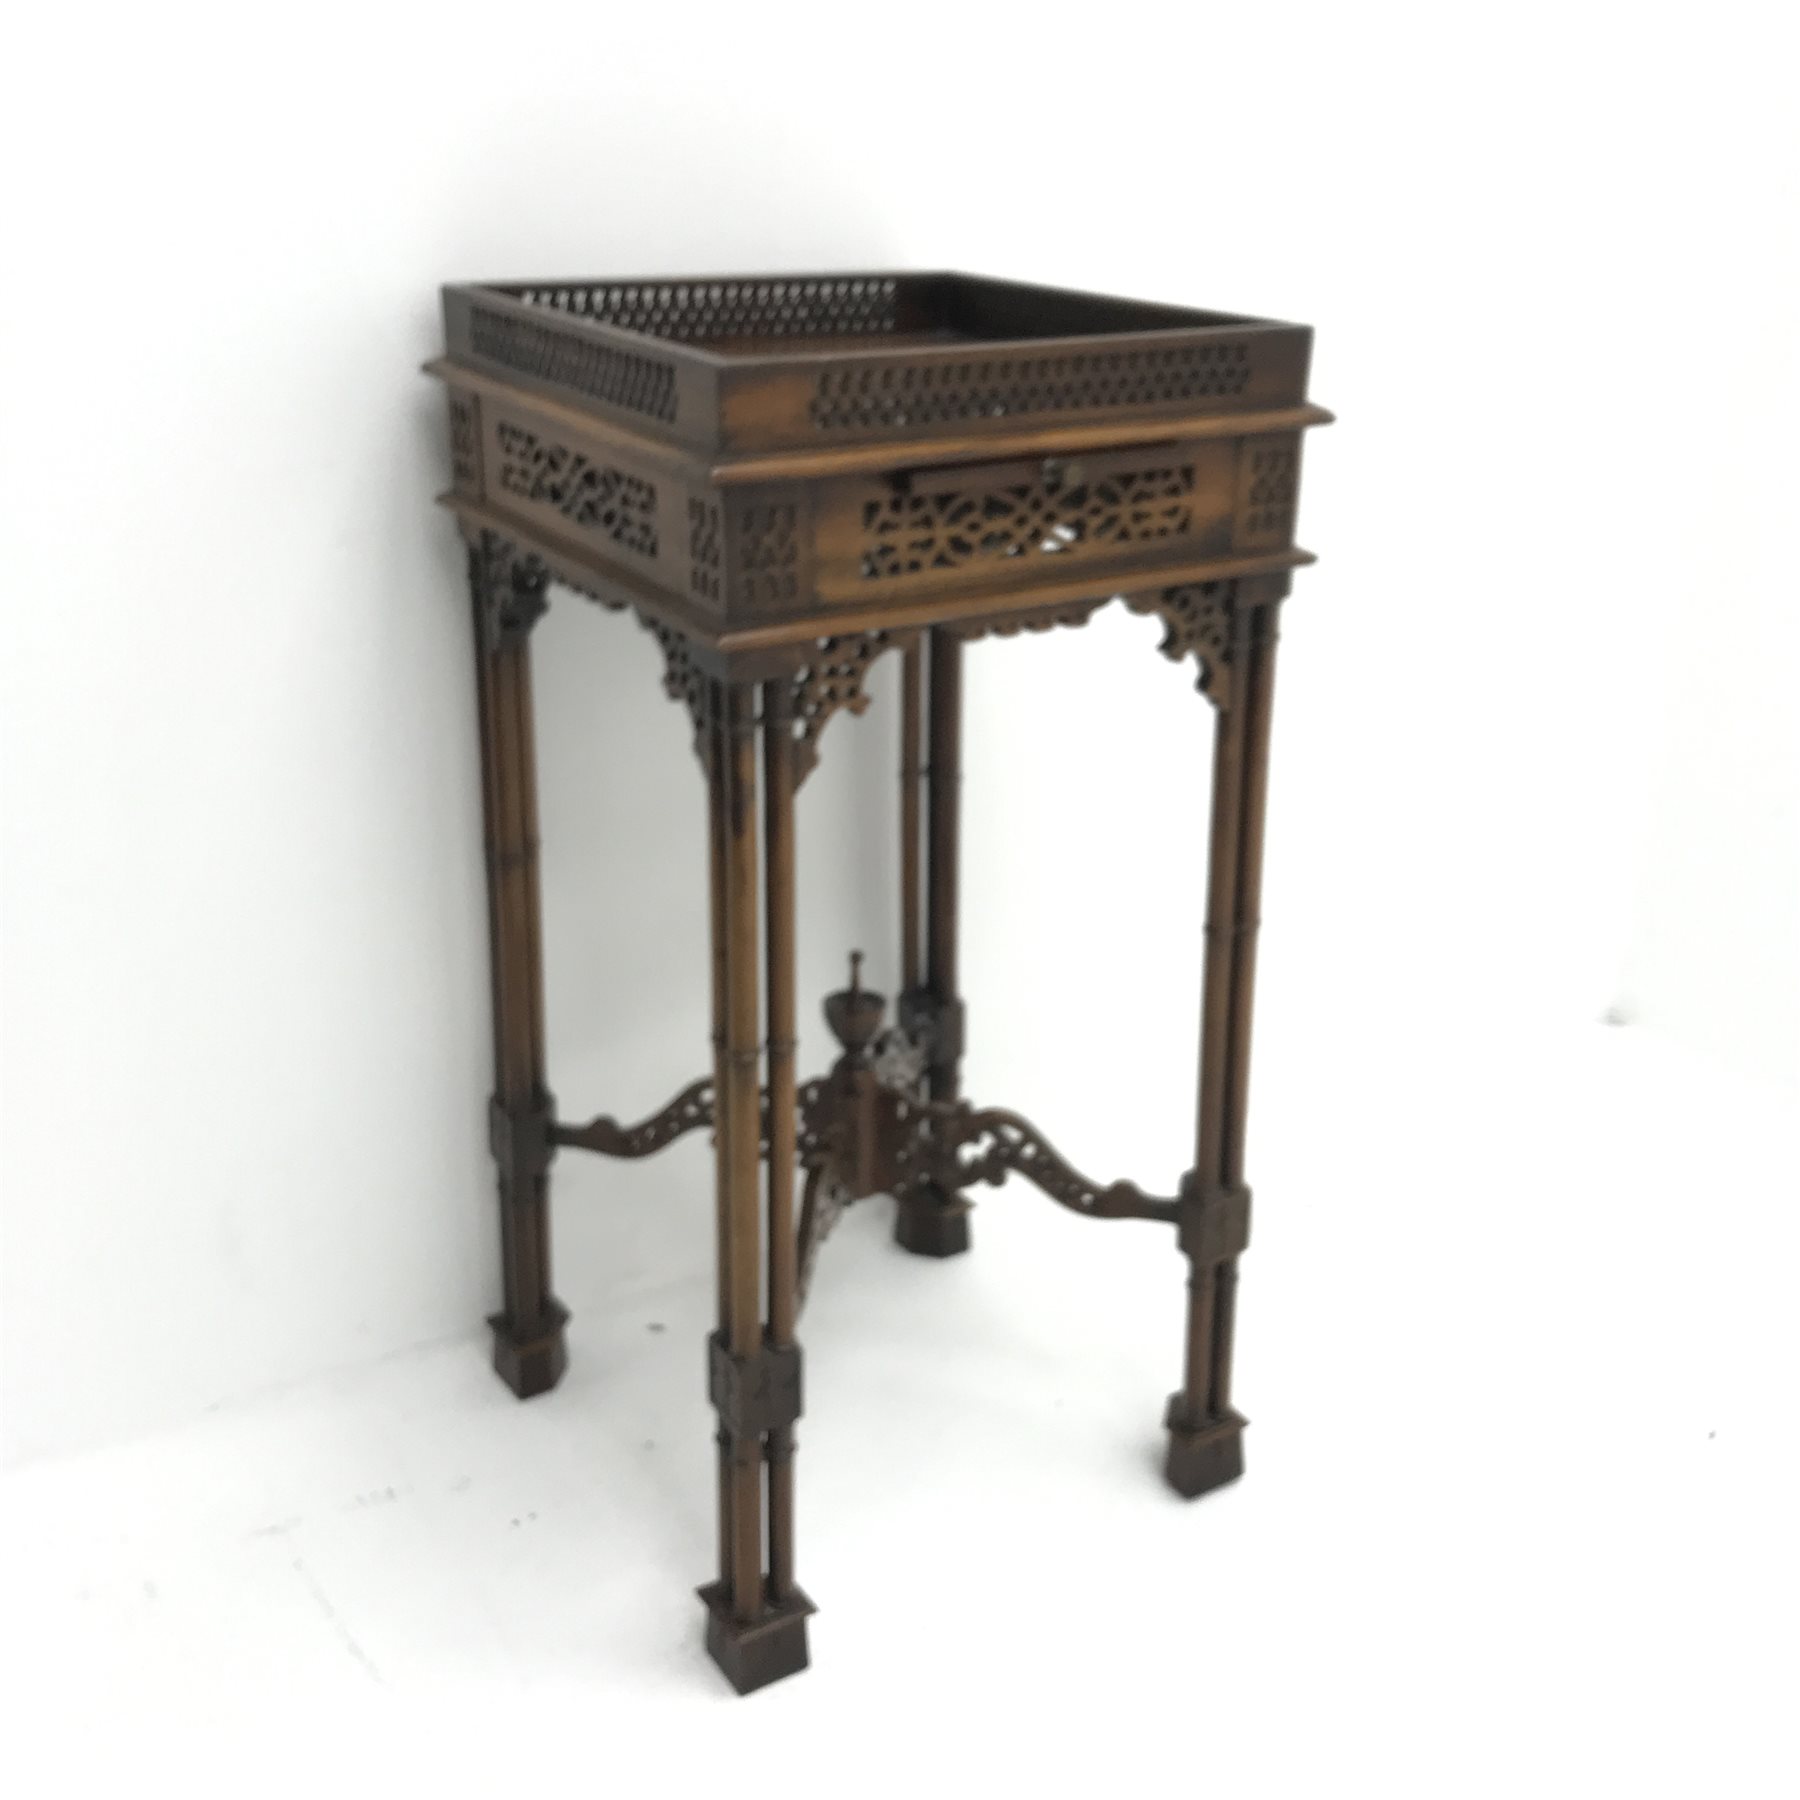 Chippendale style mahogany fretwork stand, single slide, turned supports joined by pierced stretcher